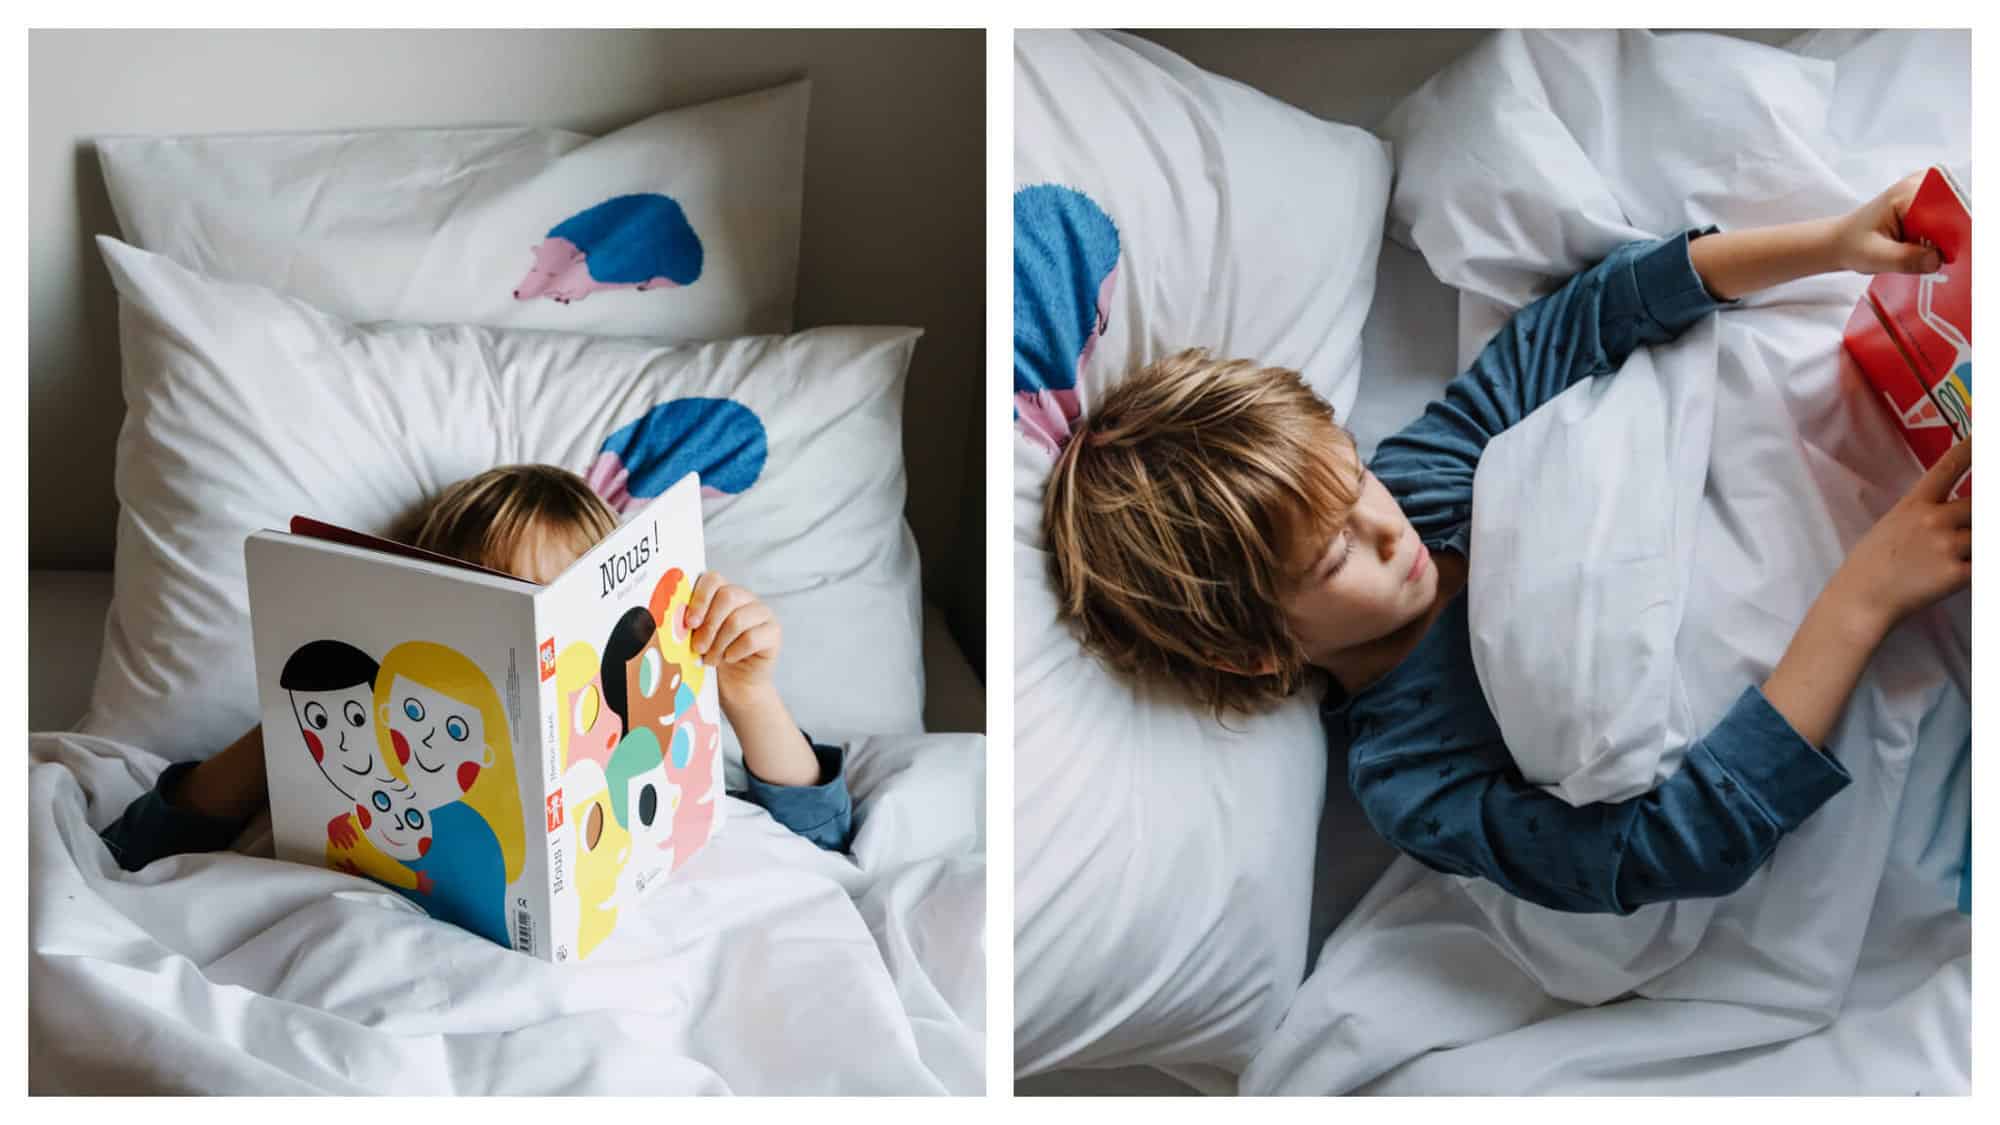 Left: A chil is lying down in a white bed, reading a book with the title "Nous!" The pillows behind him are white, with small blue porcupines on them. Right: The same image from a different angle. The child's face is visible and he is pointing to a page in the book.